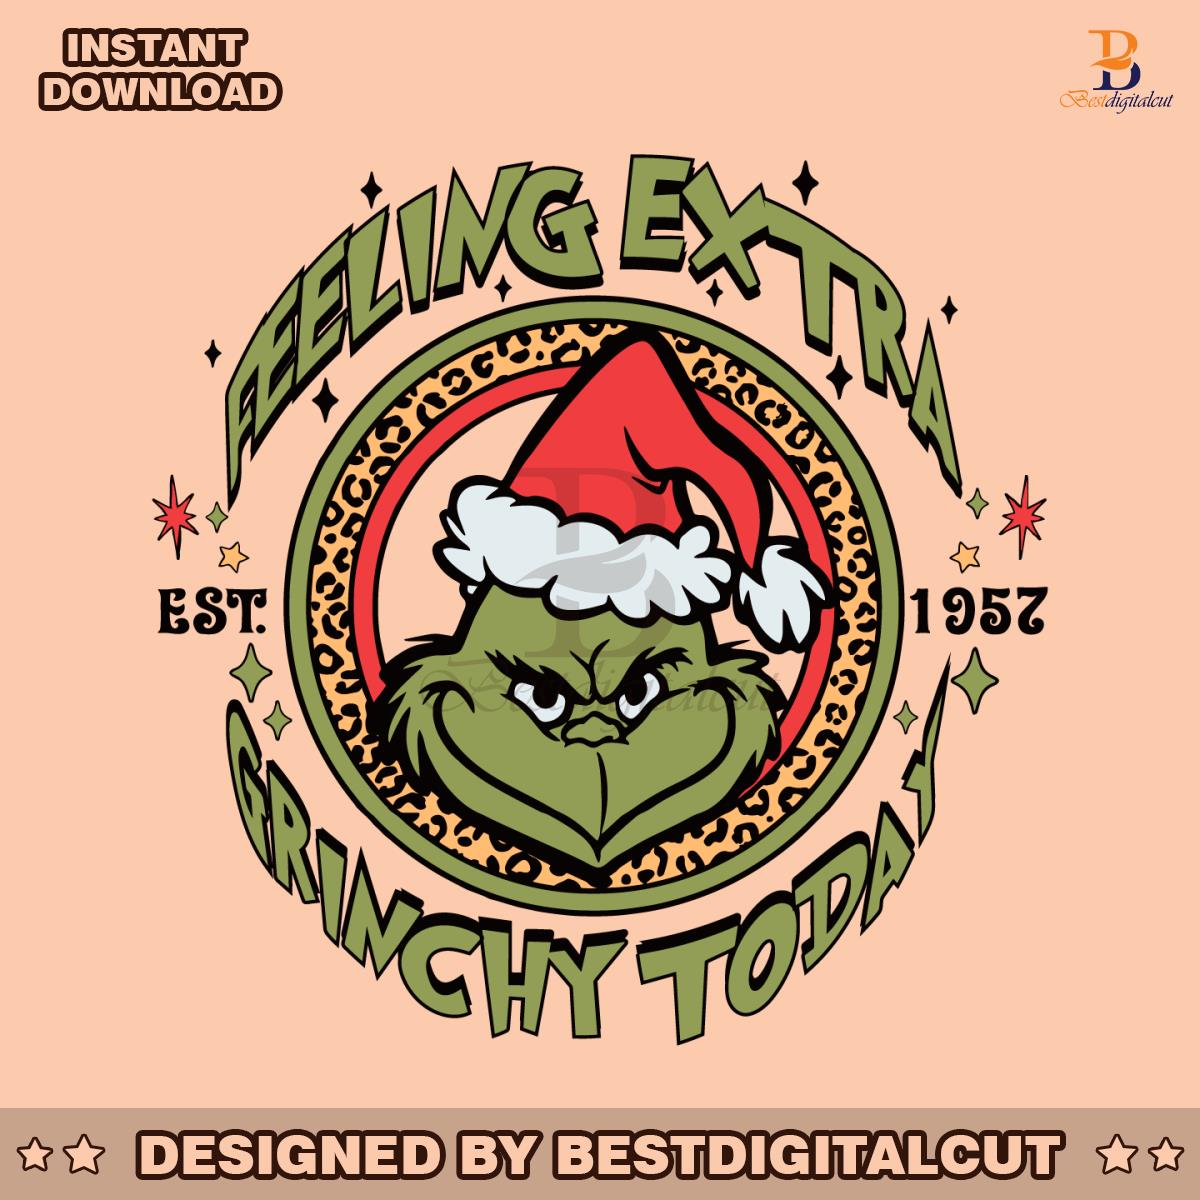 feeling-extra-grinchy-today-est-1952-svg